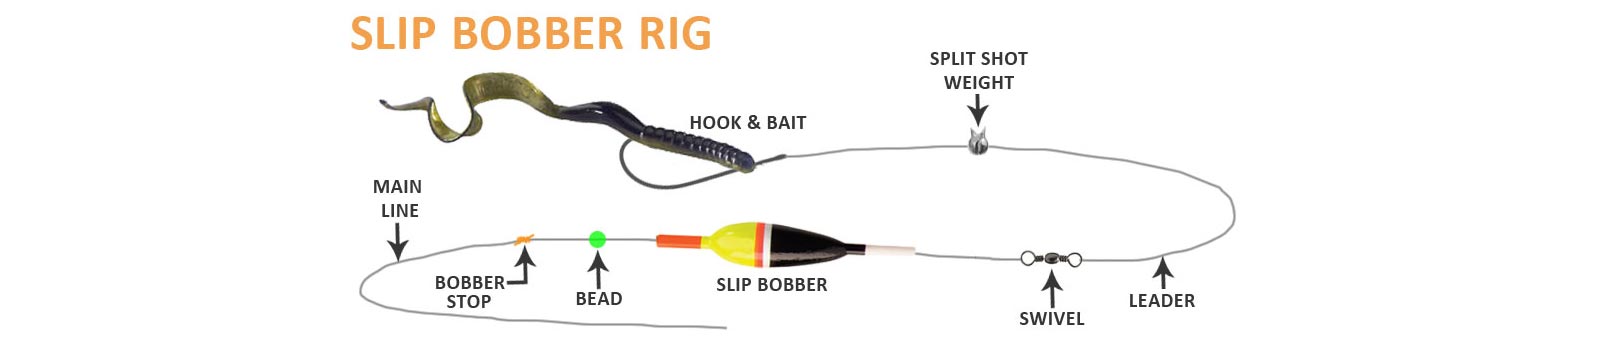 Thill Pro Series Slip Bobber Rigs Premium Fishing Float and Jig Kit Includes Lindy Snell with Swivel and Spinner Blade and Bobber Bug Jig or Tru-Turn Hook 